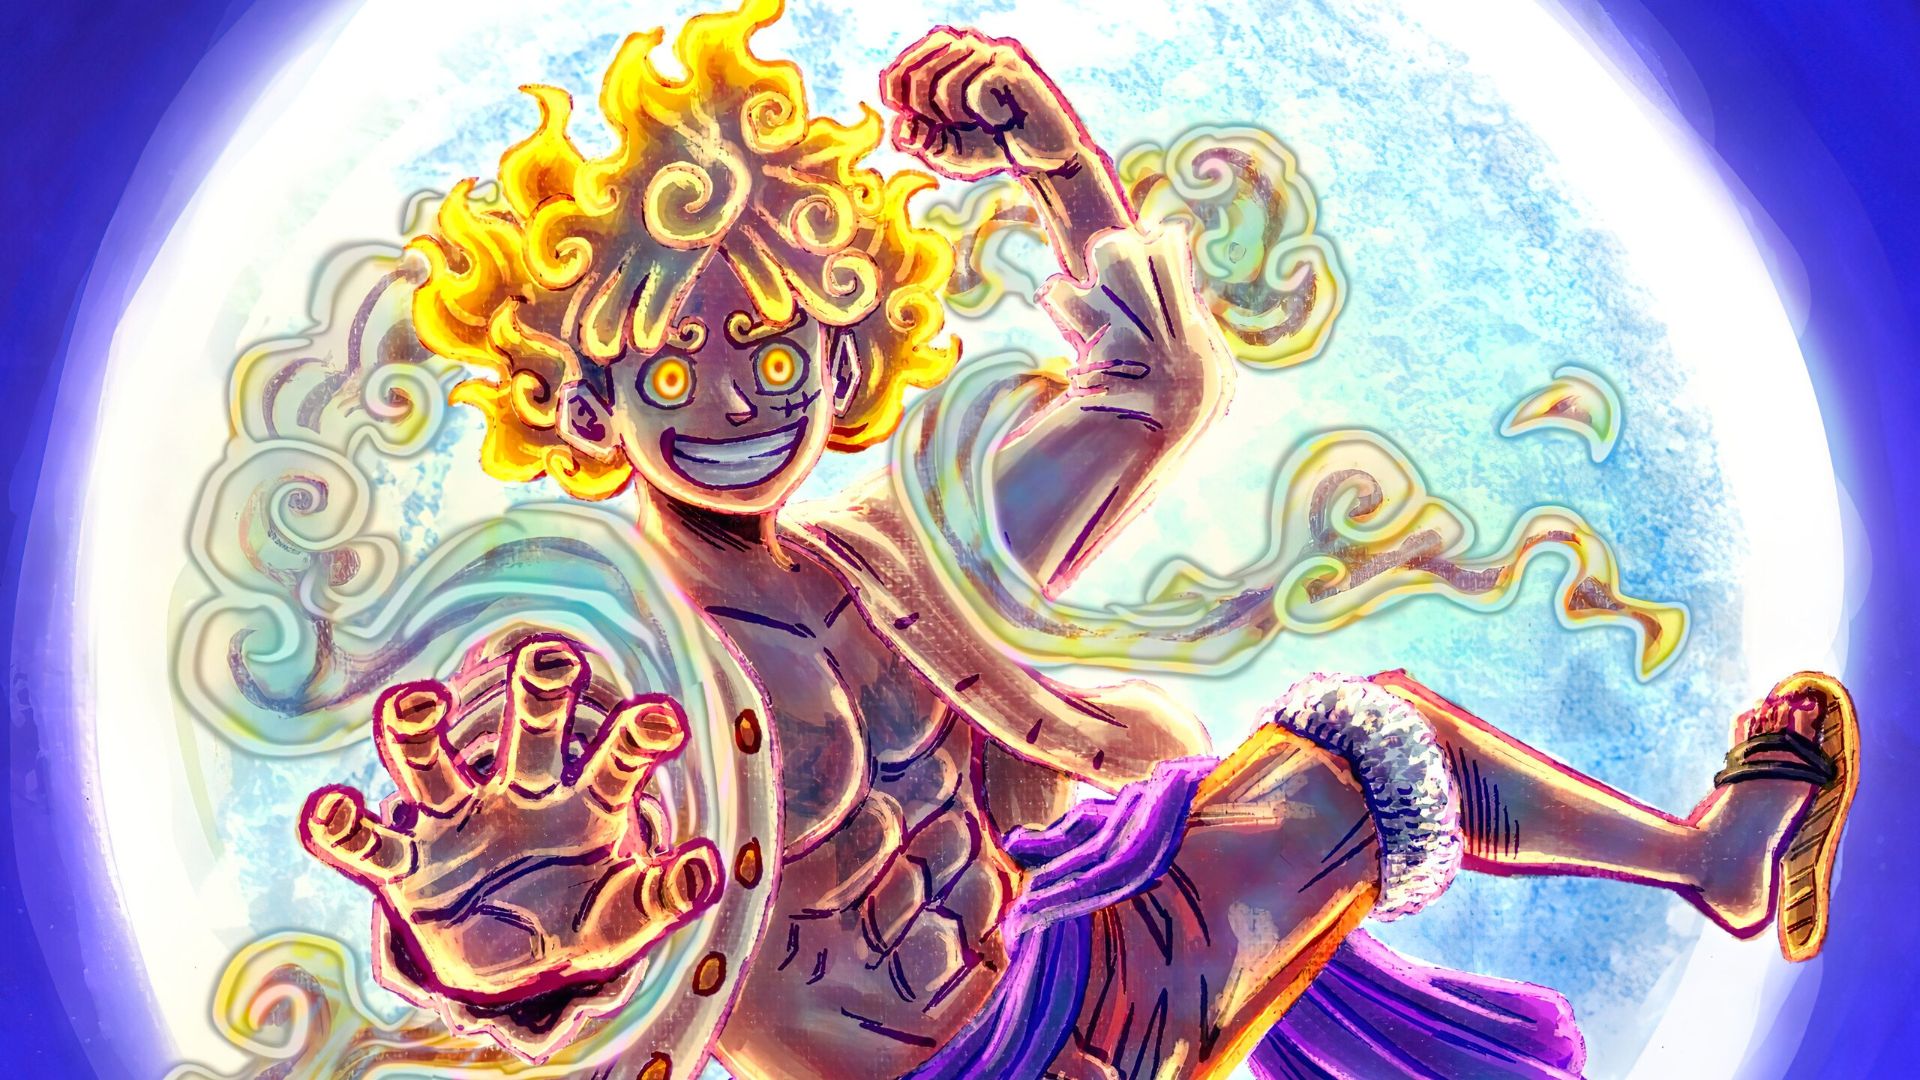 Gear 5 One Piece Backgrounds PC